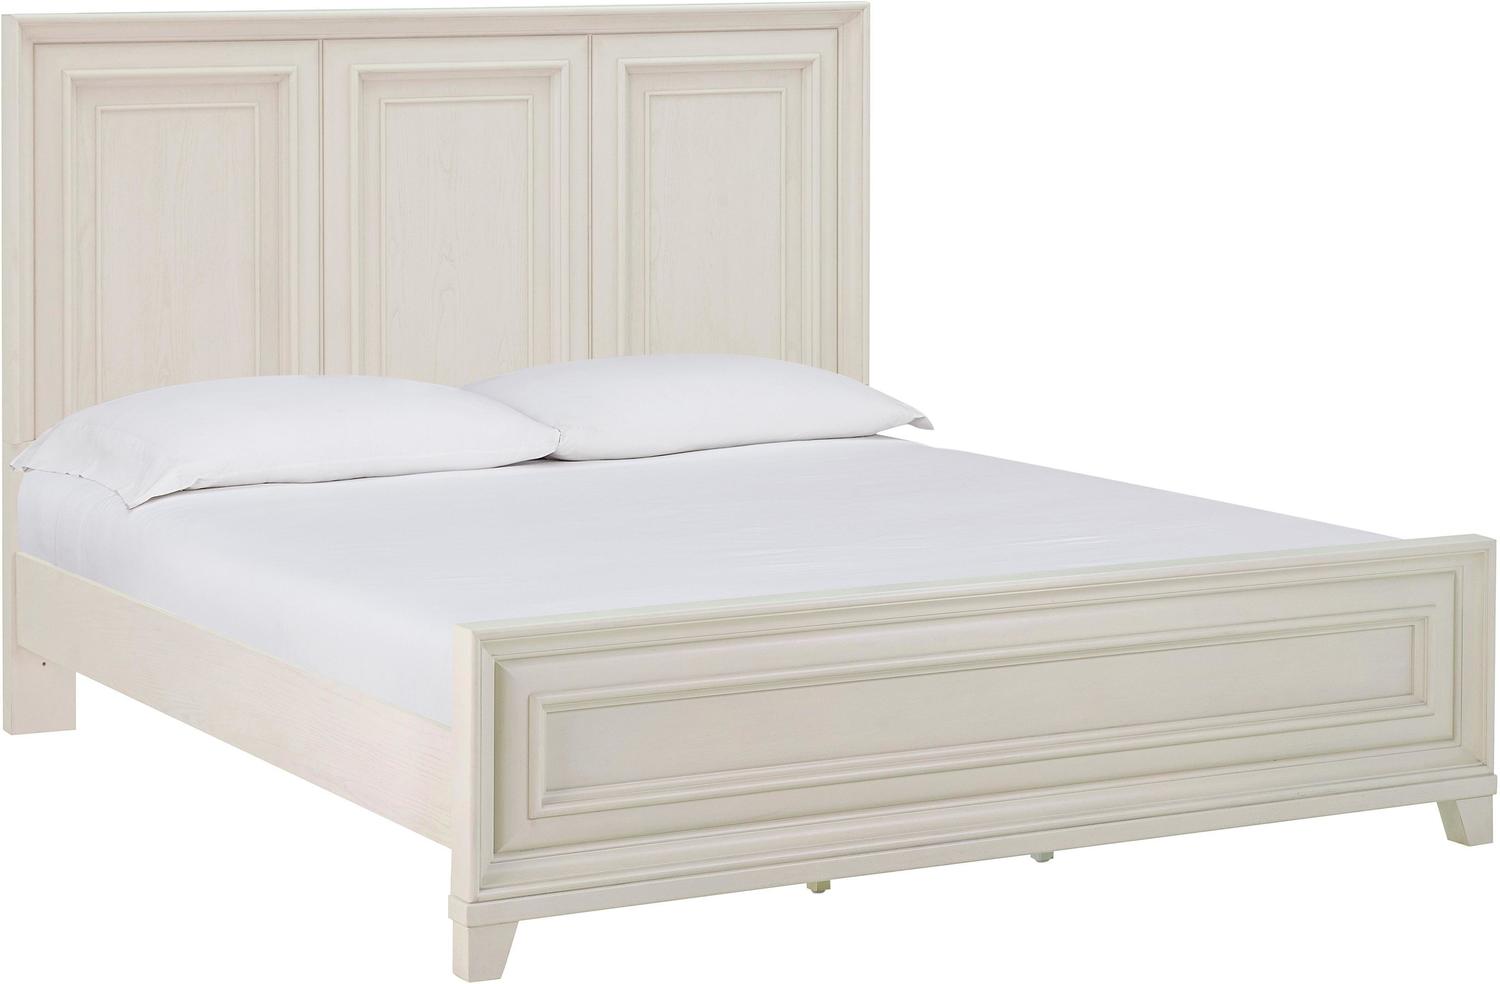 twin xl mattress for sale near me Contemporary Design Furniture Beds White